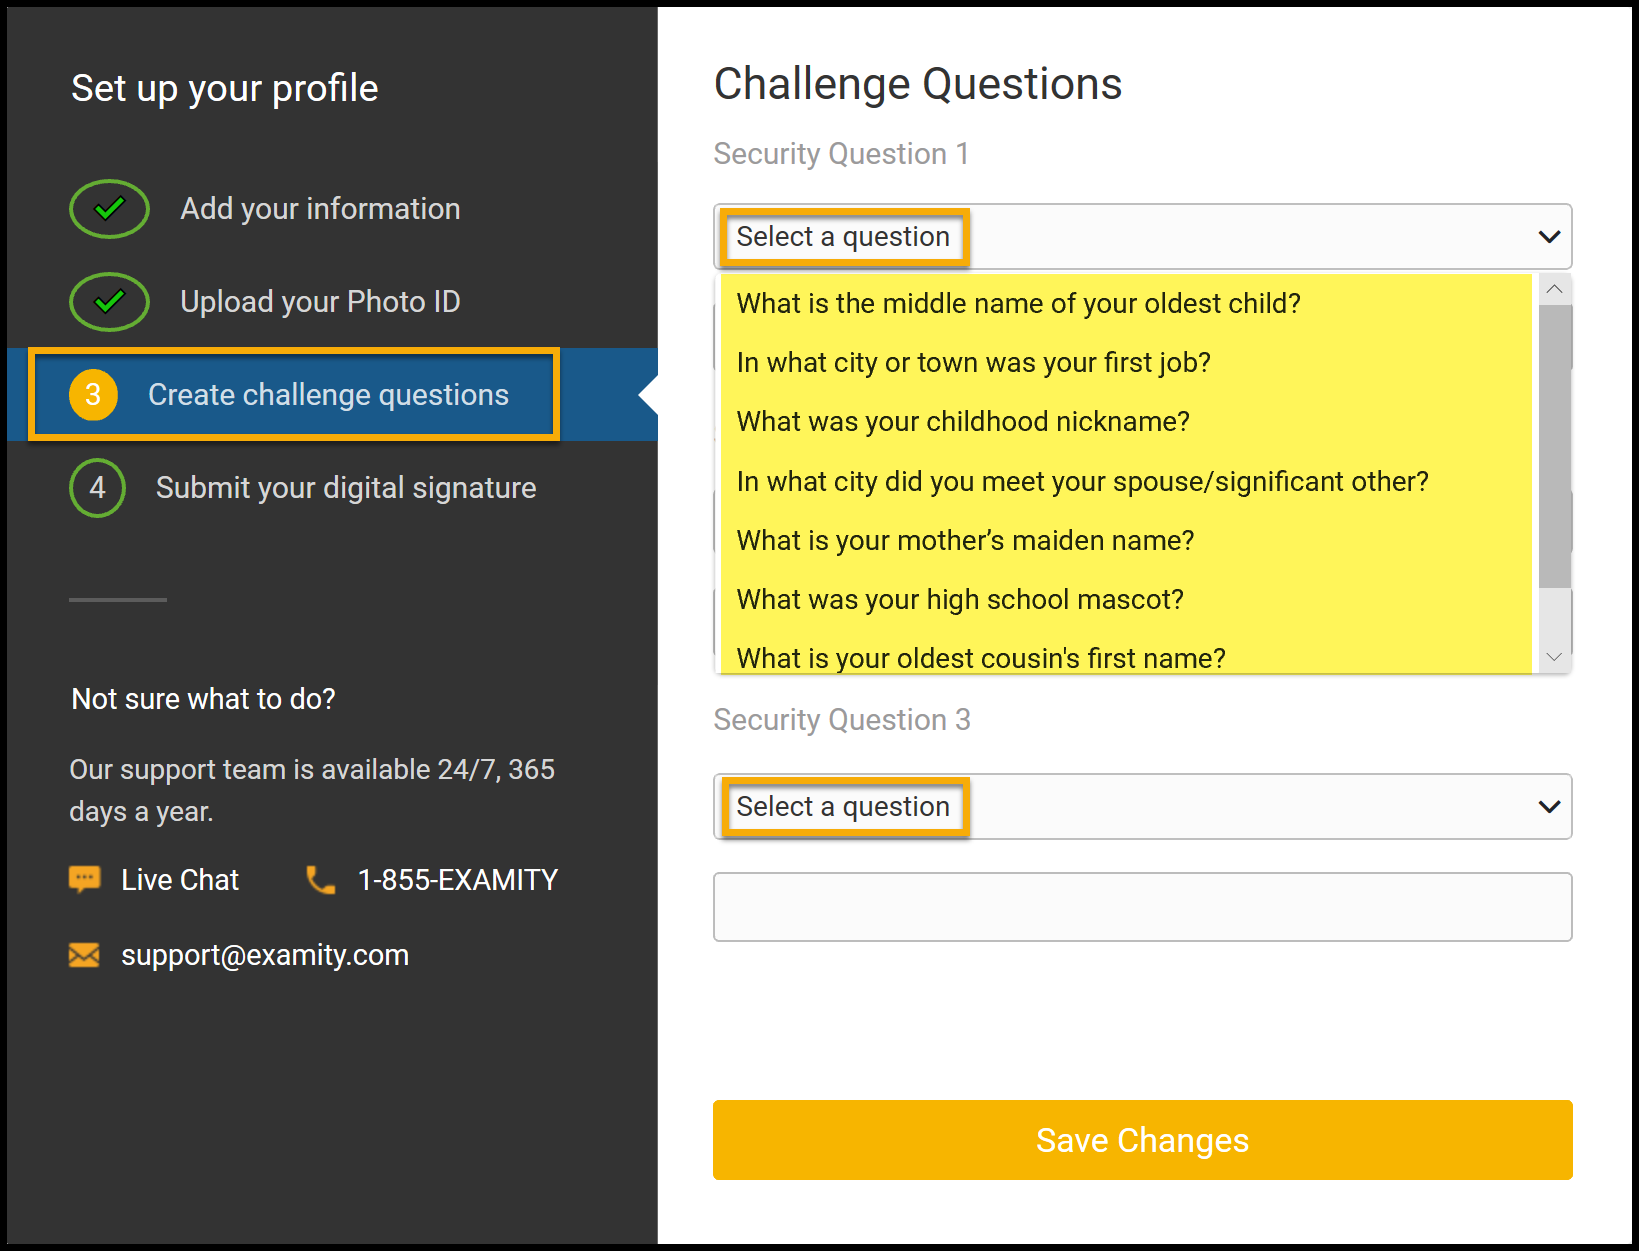 Create challendge response window opened to expanded list of typical questions that include: oldest child, first job, nickname, maiden name, mascot and oldest cousin. Field to give answer provided.